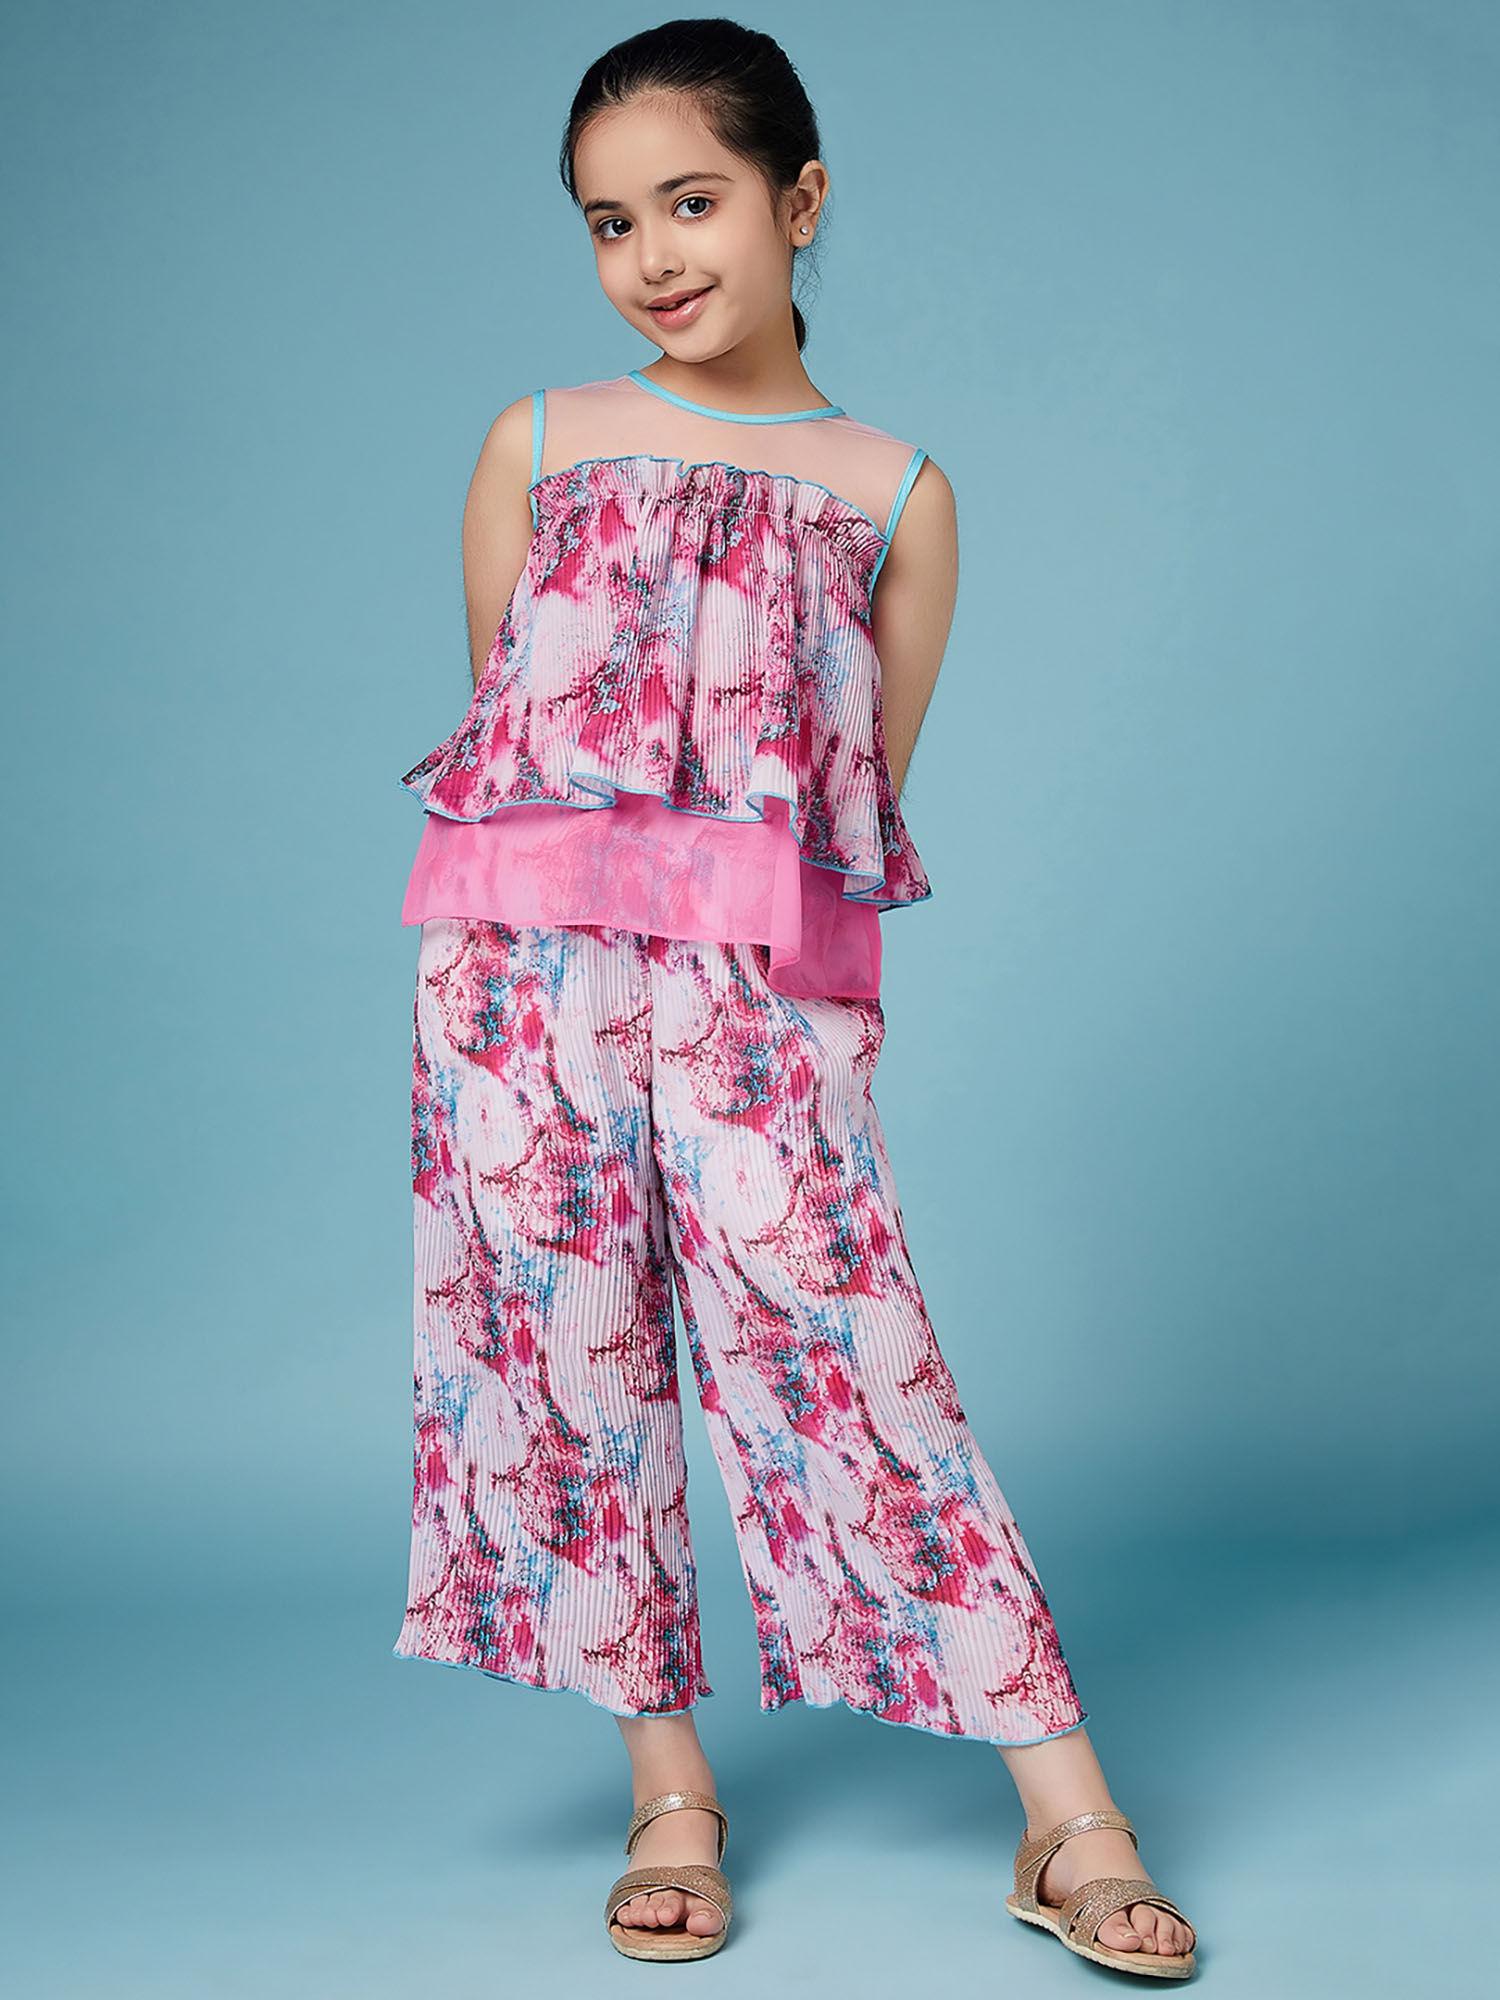 pleat pink clothing (set of 2)